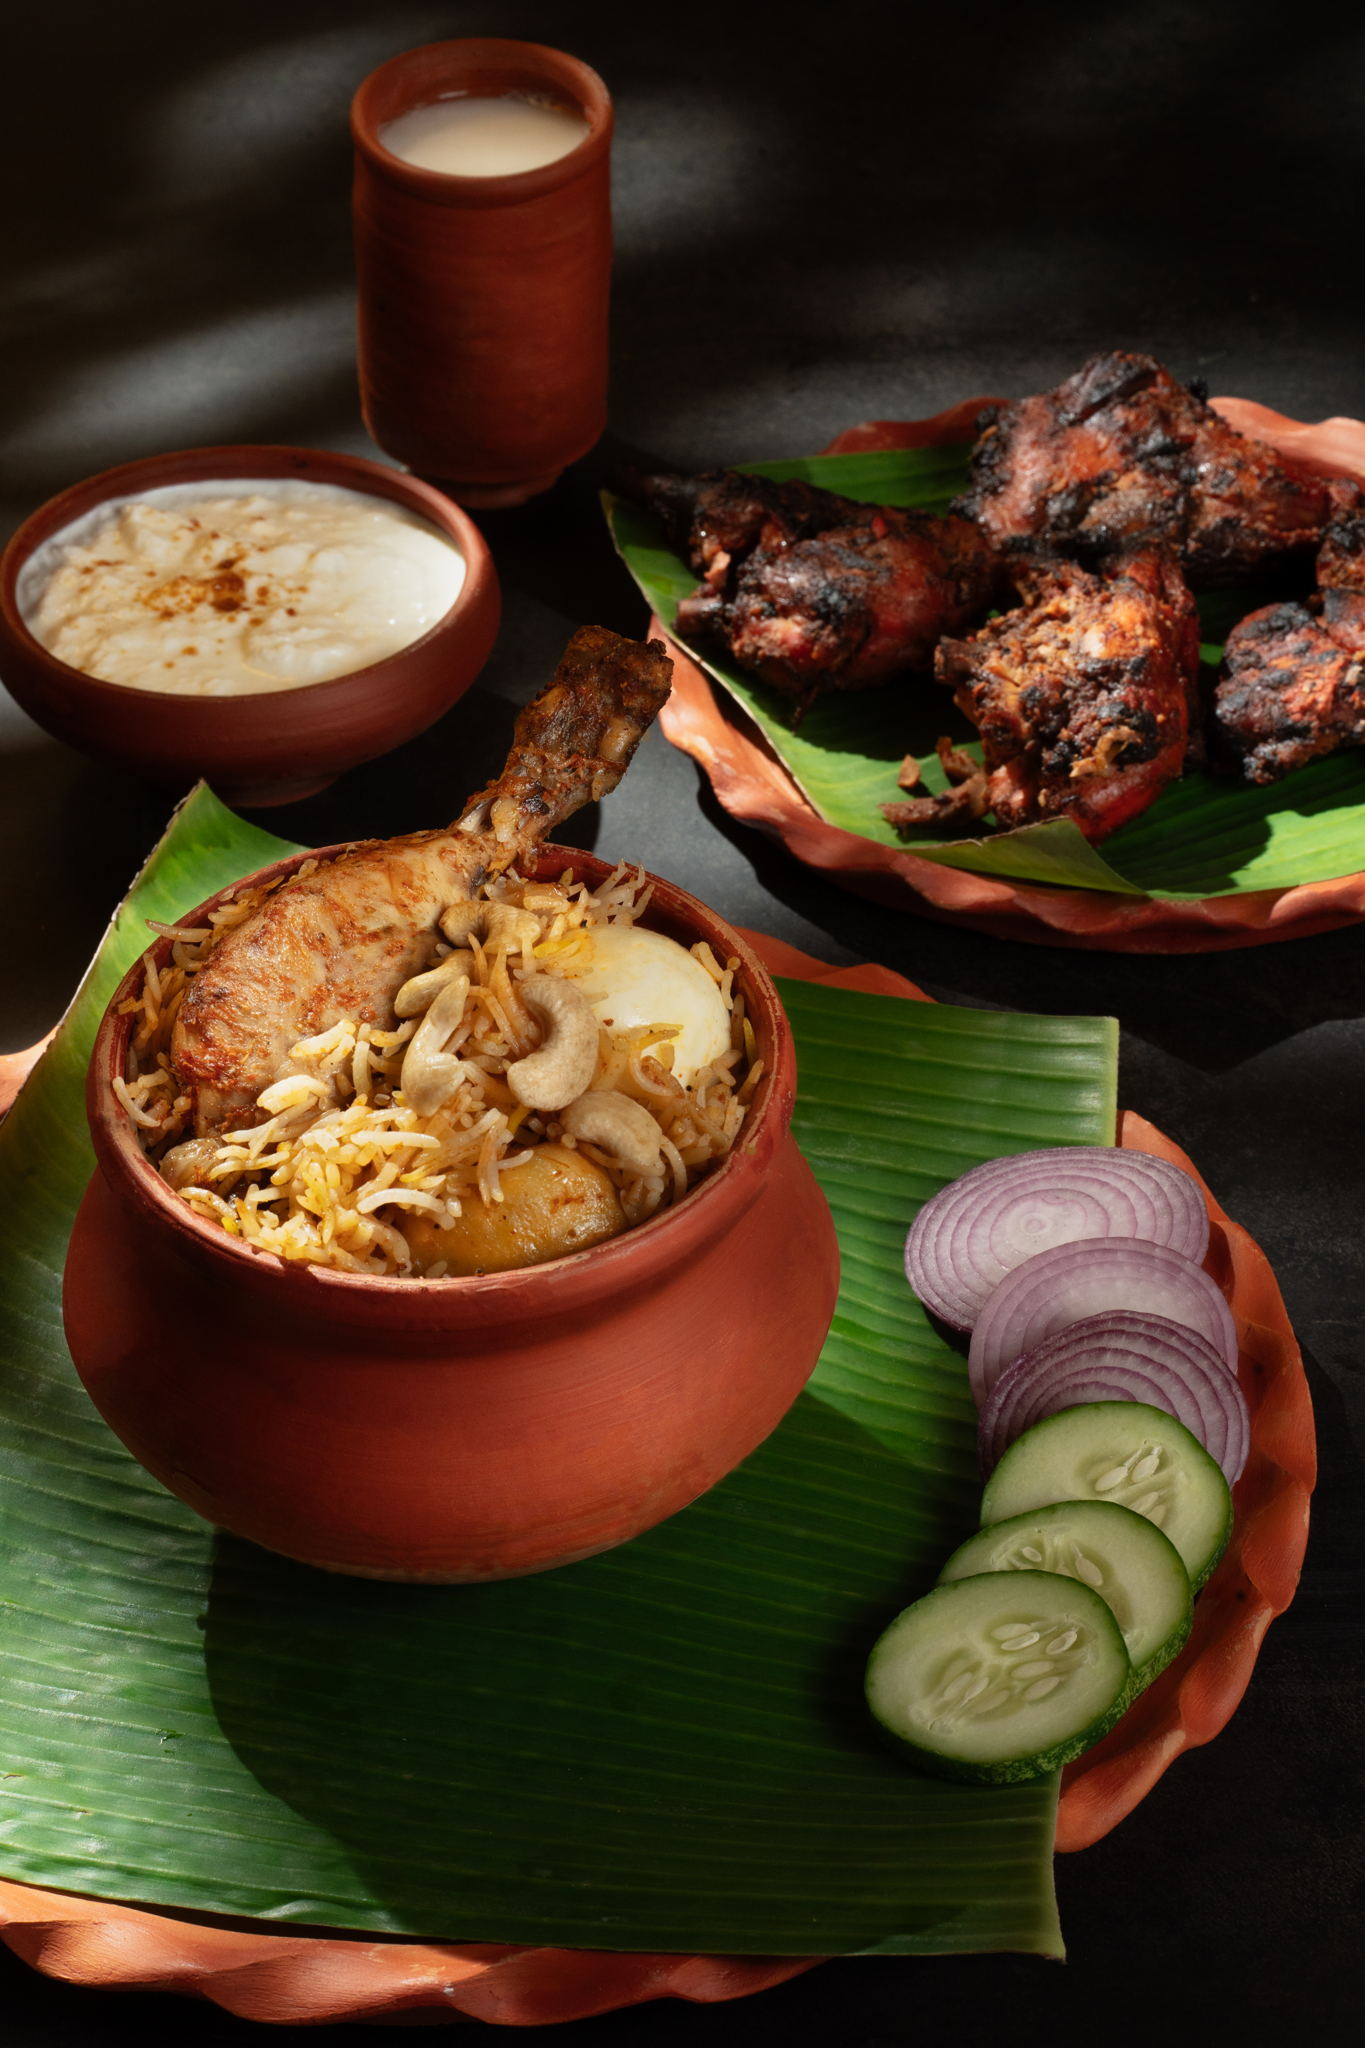 Close-up of a traditional Indian chicken biryani dish on a banana leaf, garnished with onions, cucumbers, and yogurt